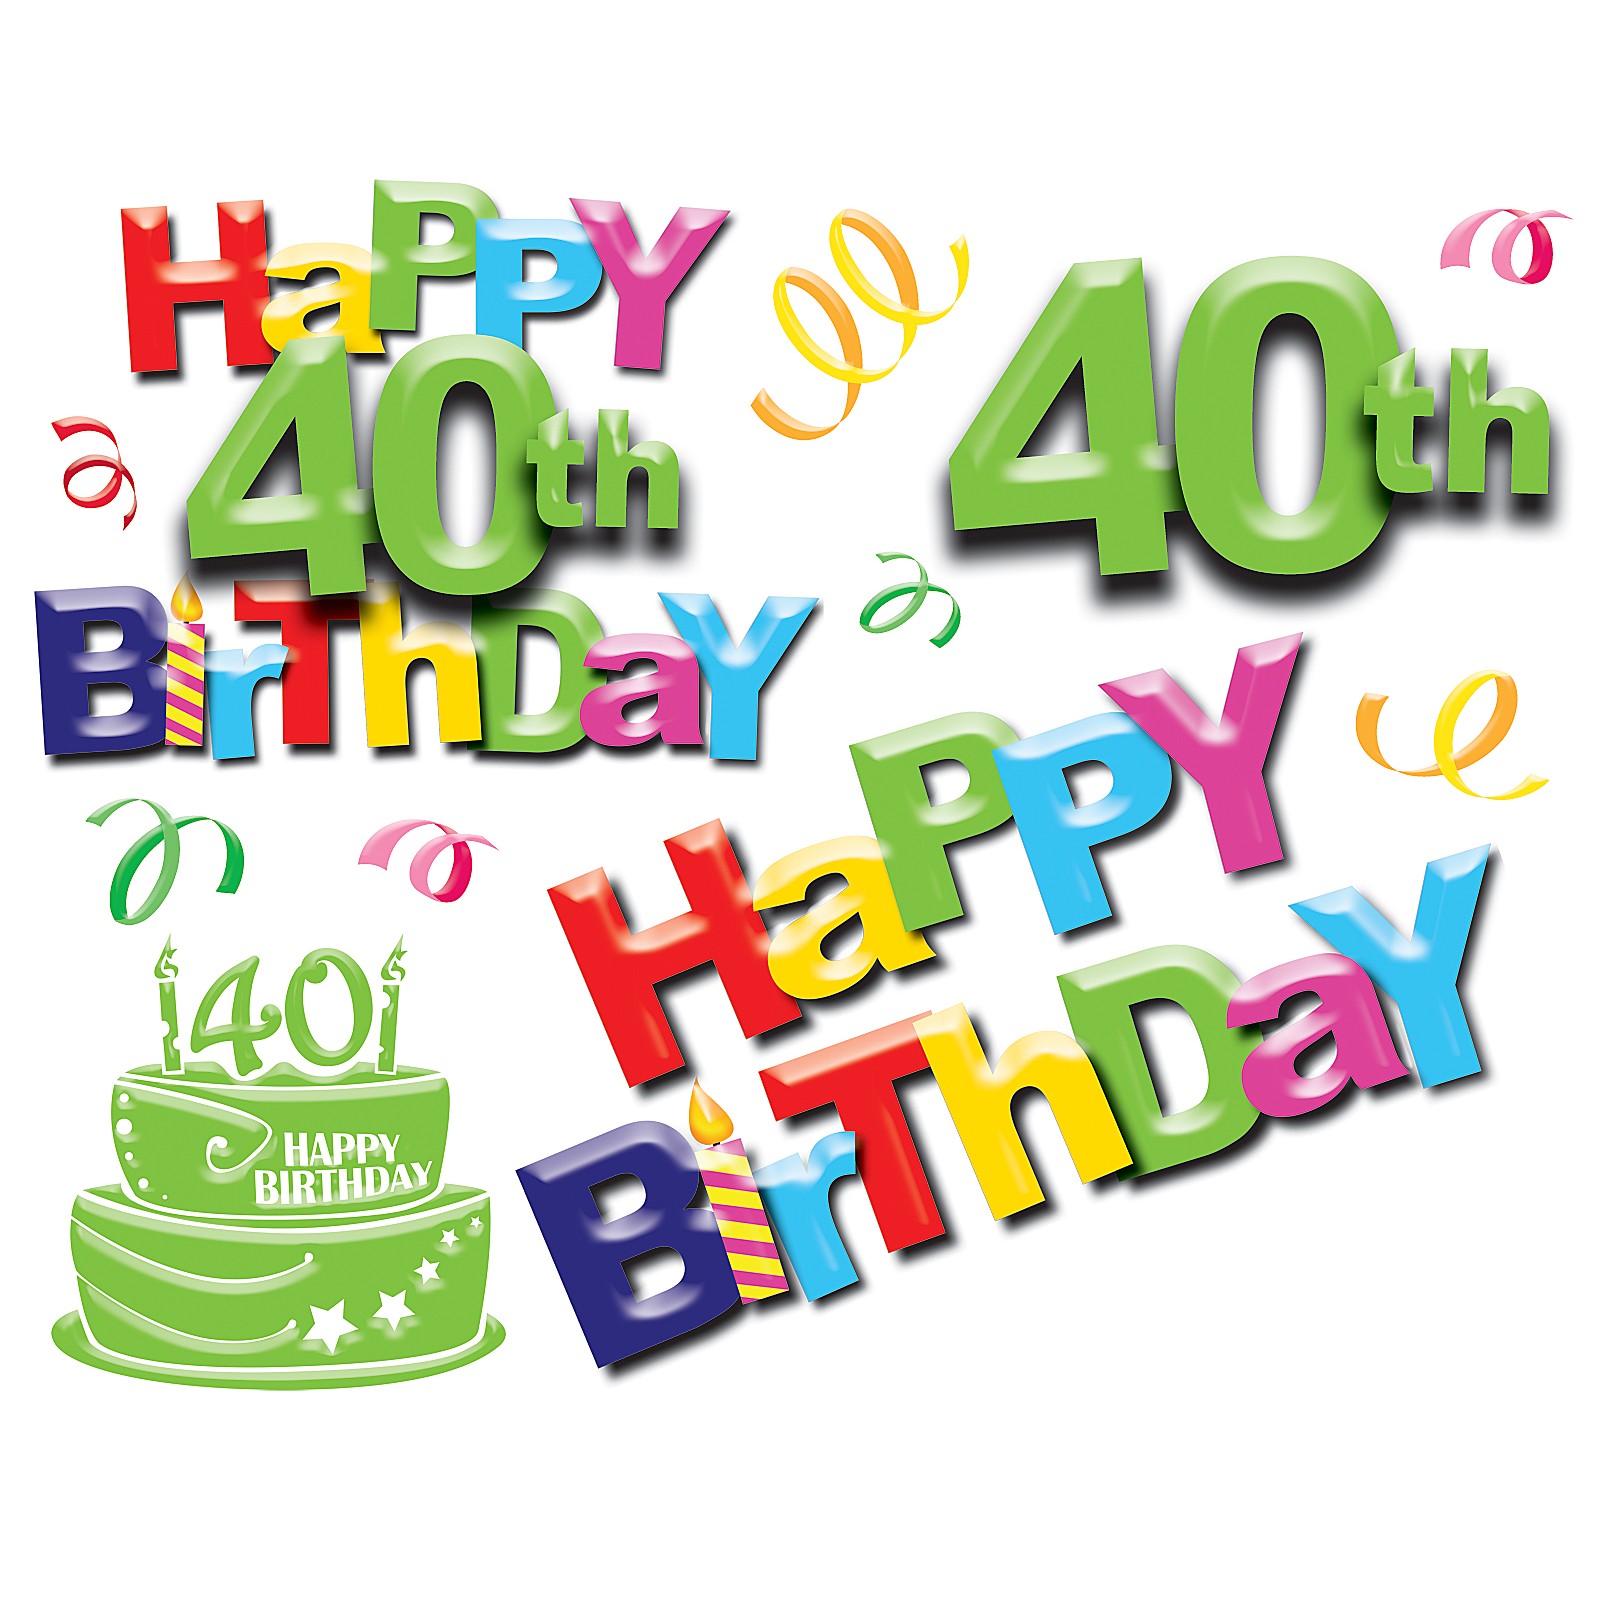 40th birthday pictures clip art | pubzday